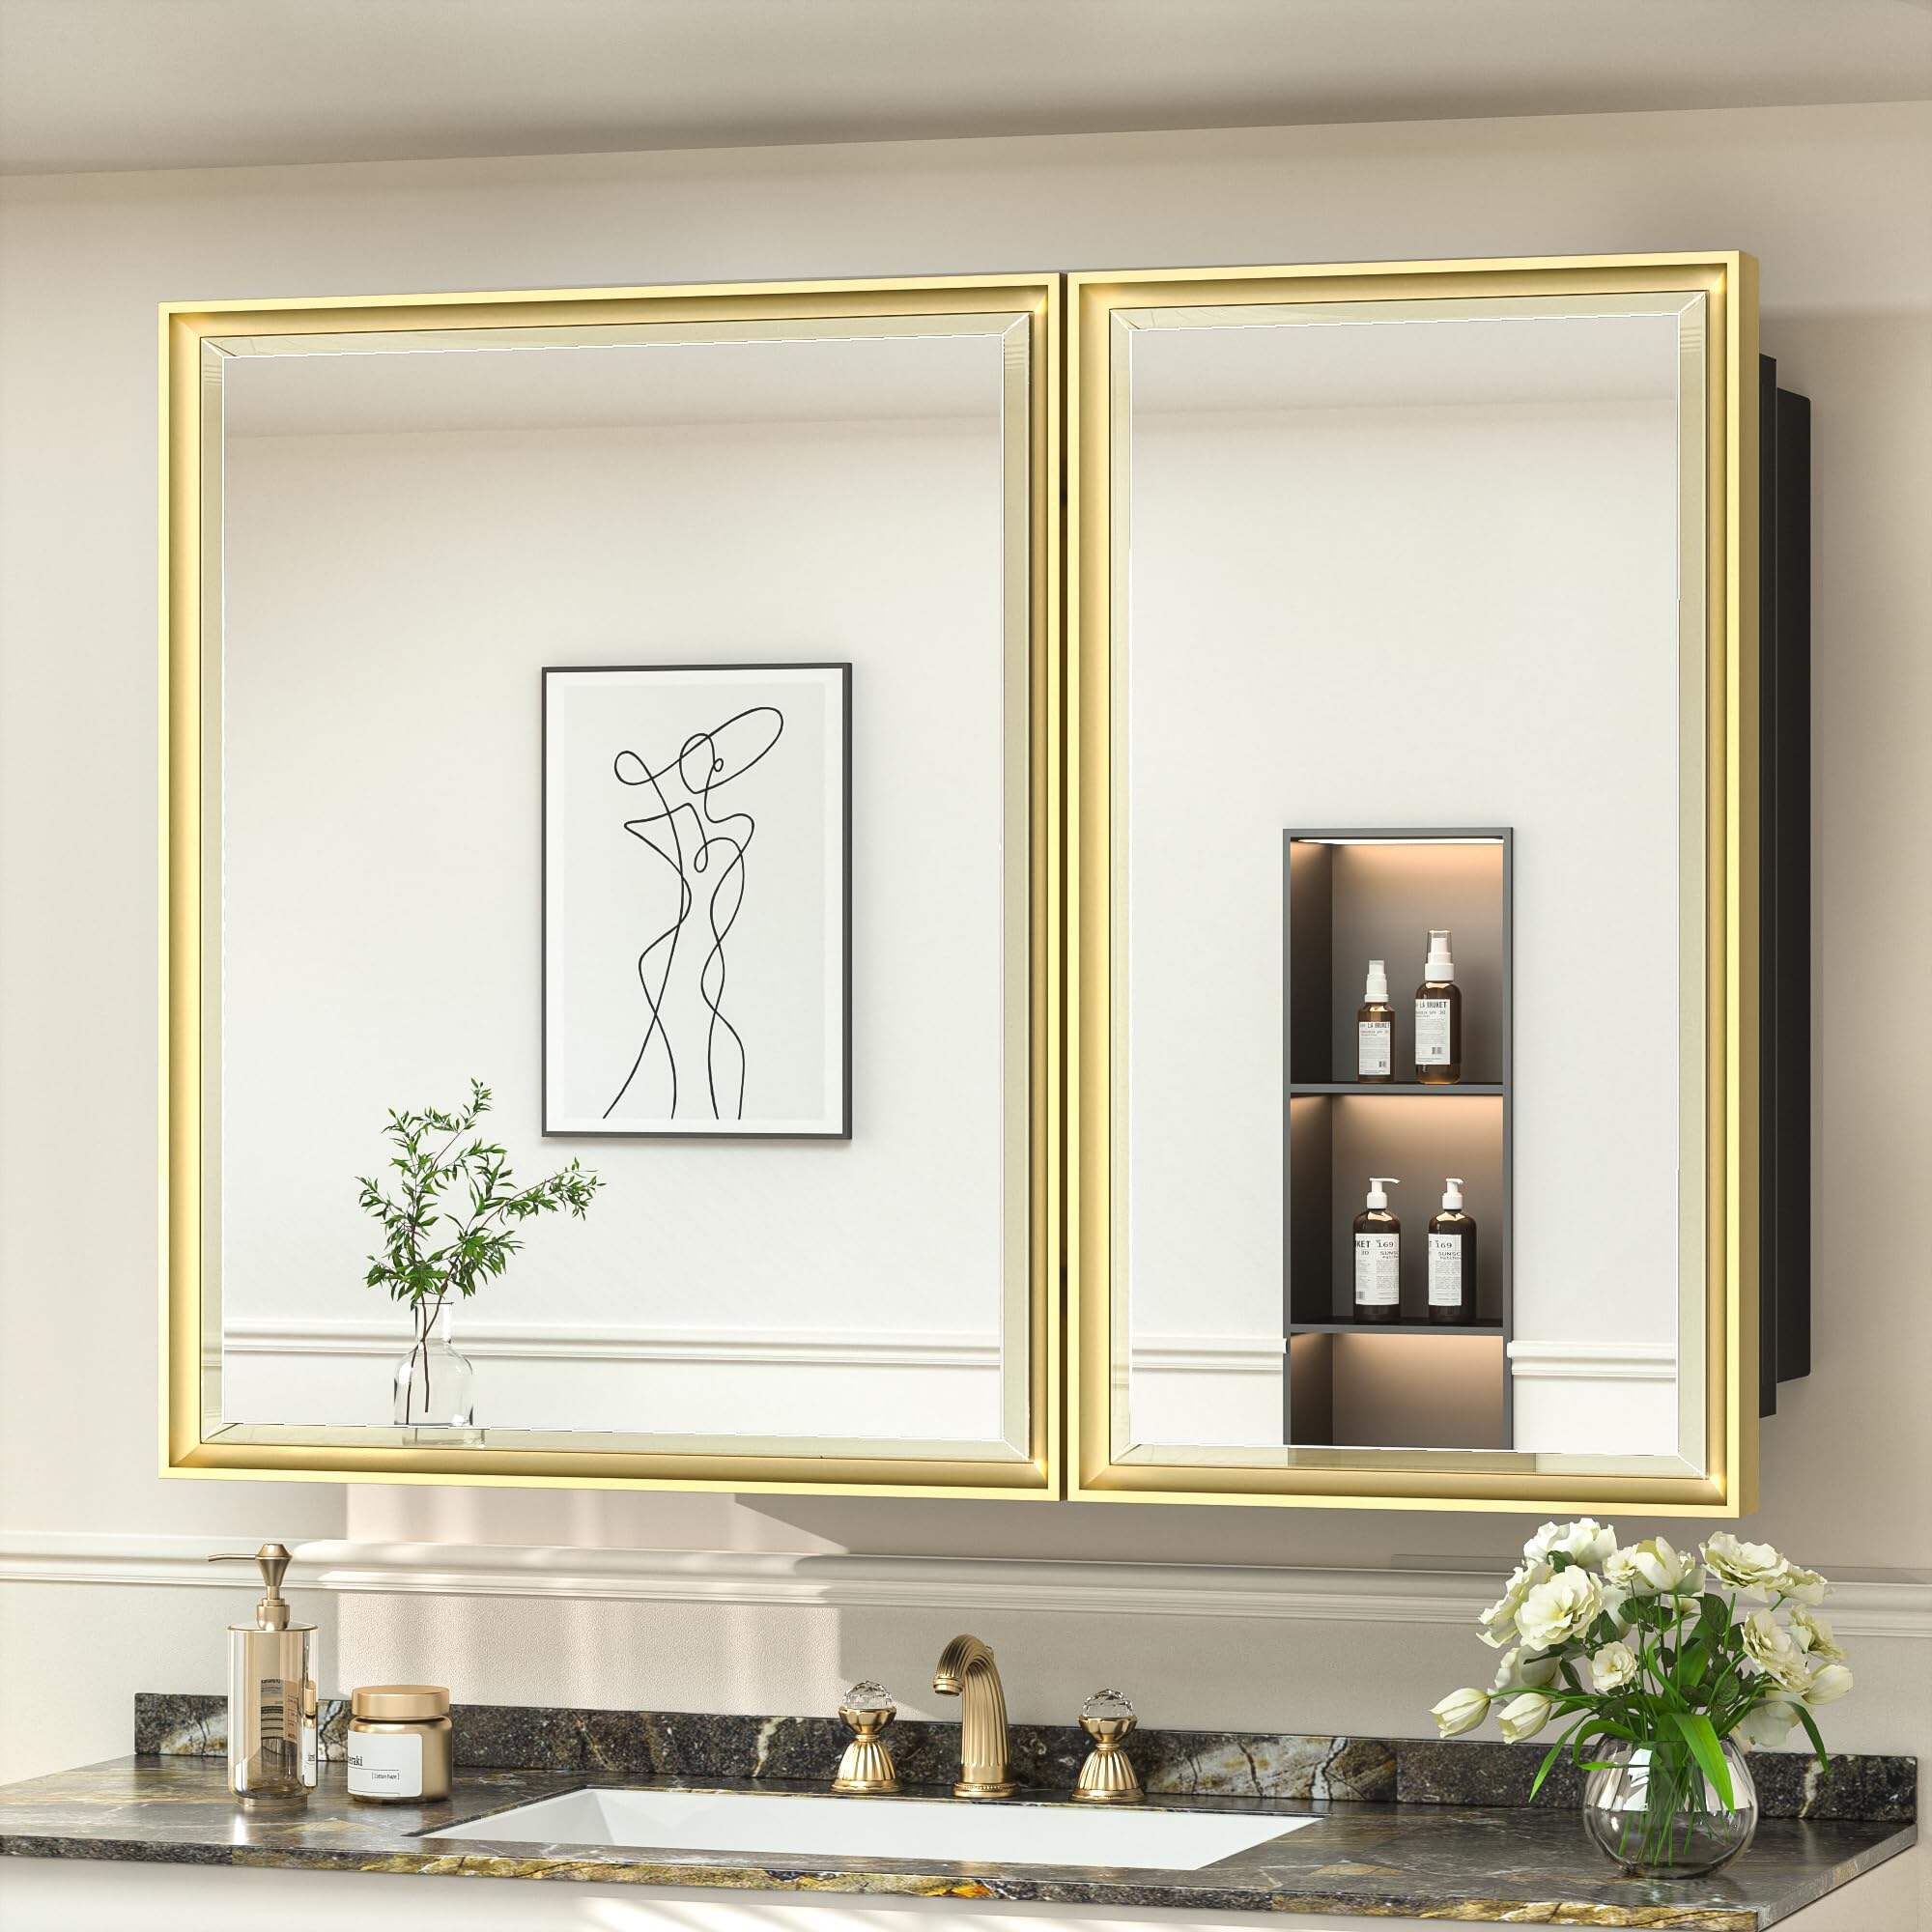 Foshan Haohan Smart Home Co., Ltd.Recessed Medicine Cabinet 40x30 in Bathroom Vanity Mirror Gold Metal Framed Surface Wall Mounted with Aluminum Alloy Beveled Edges Design 2 Door for Modern Farmhouse